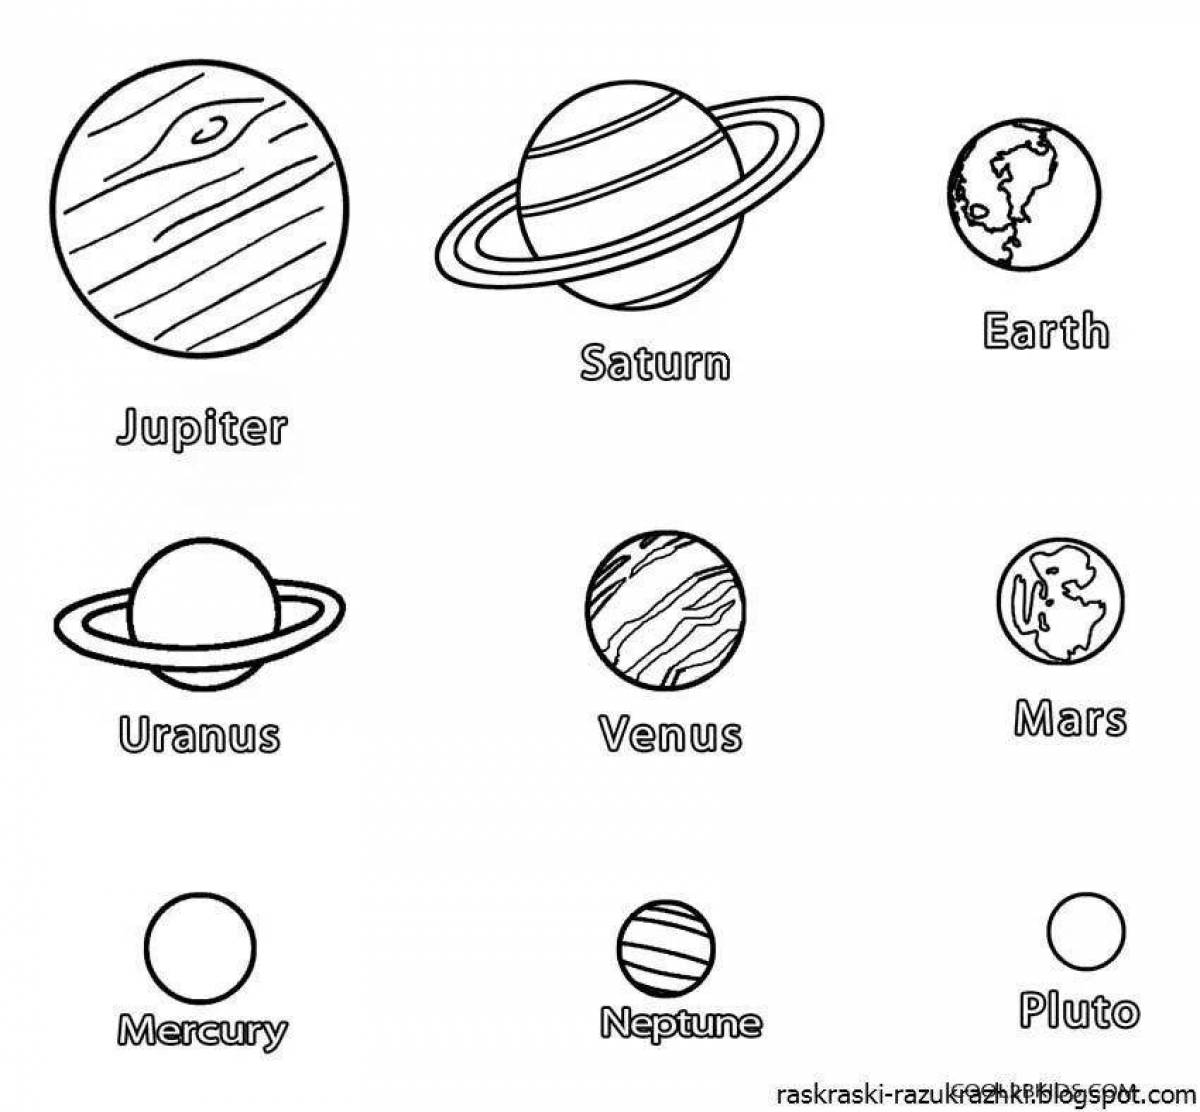 Stimulating solar system coloring book